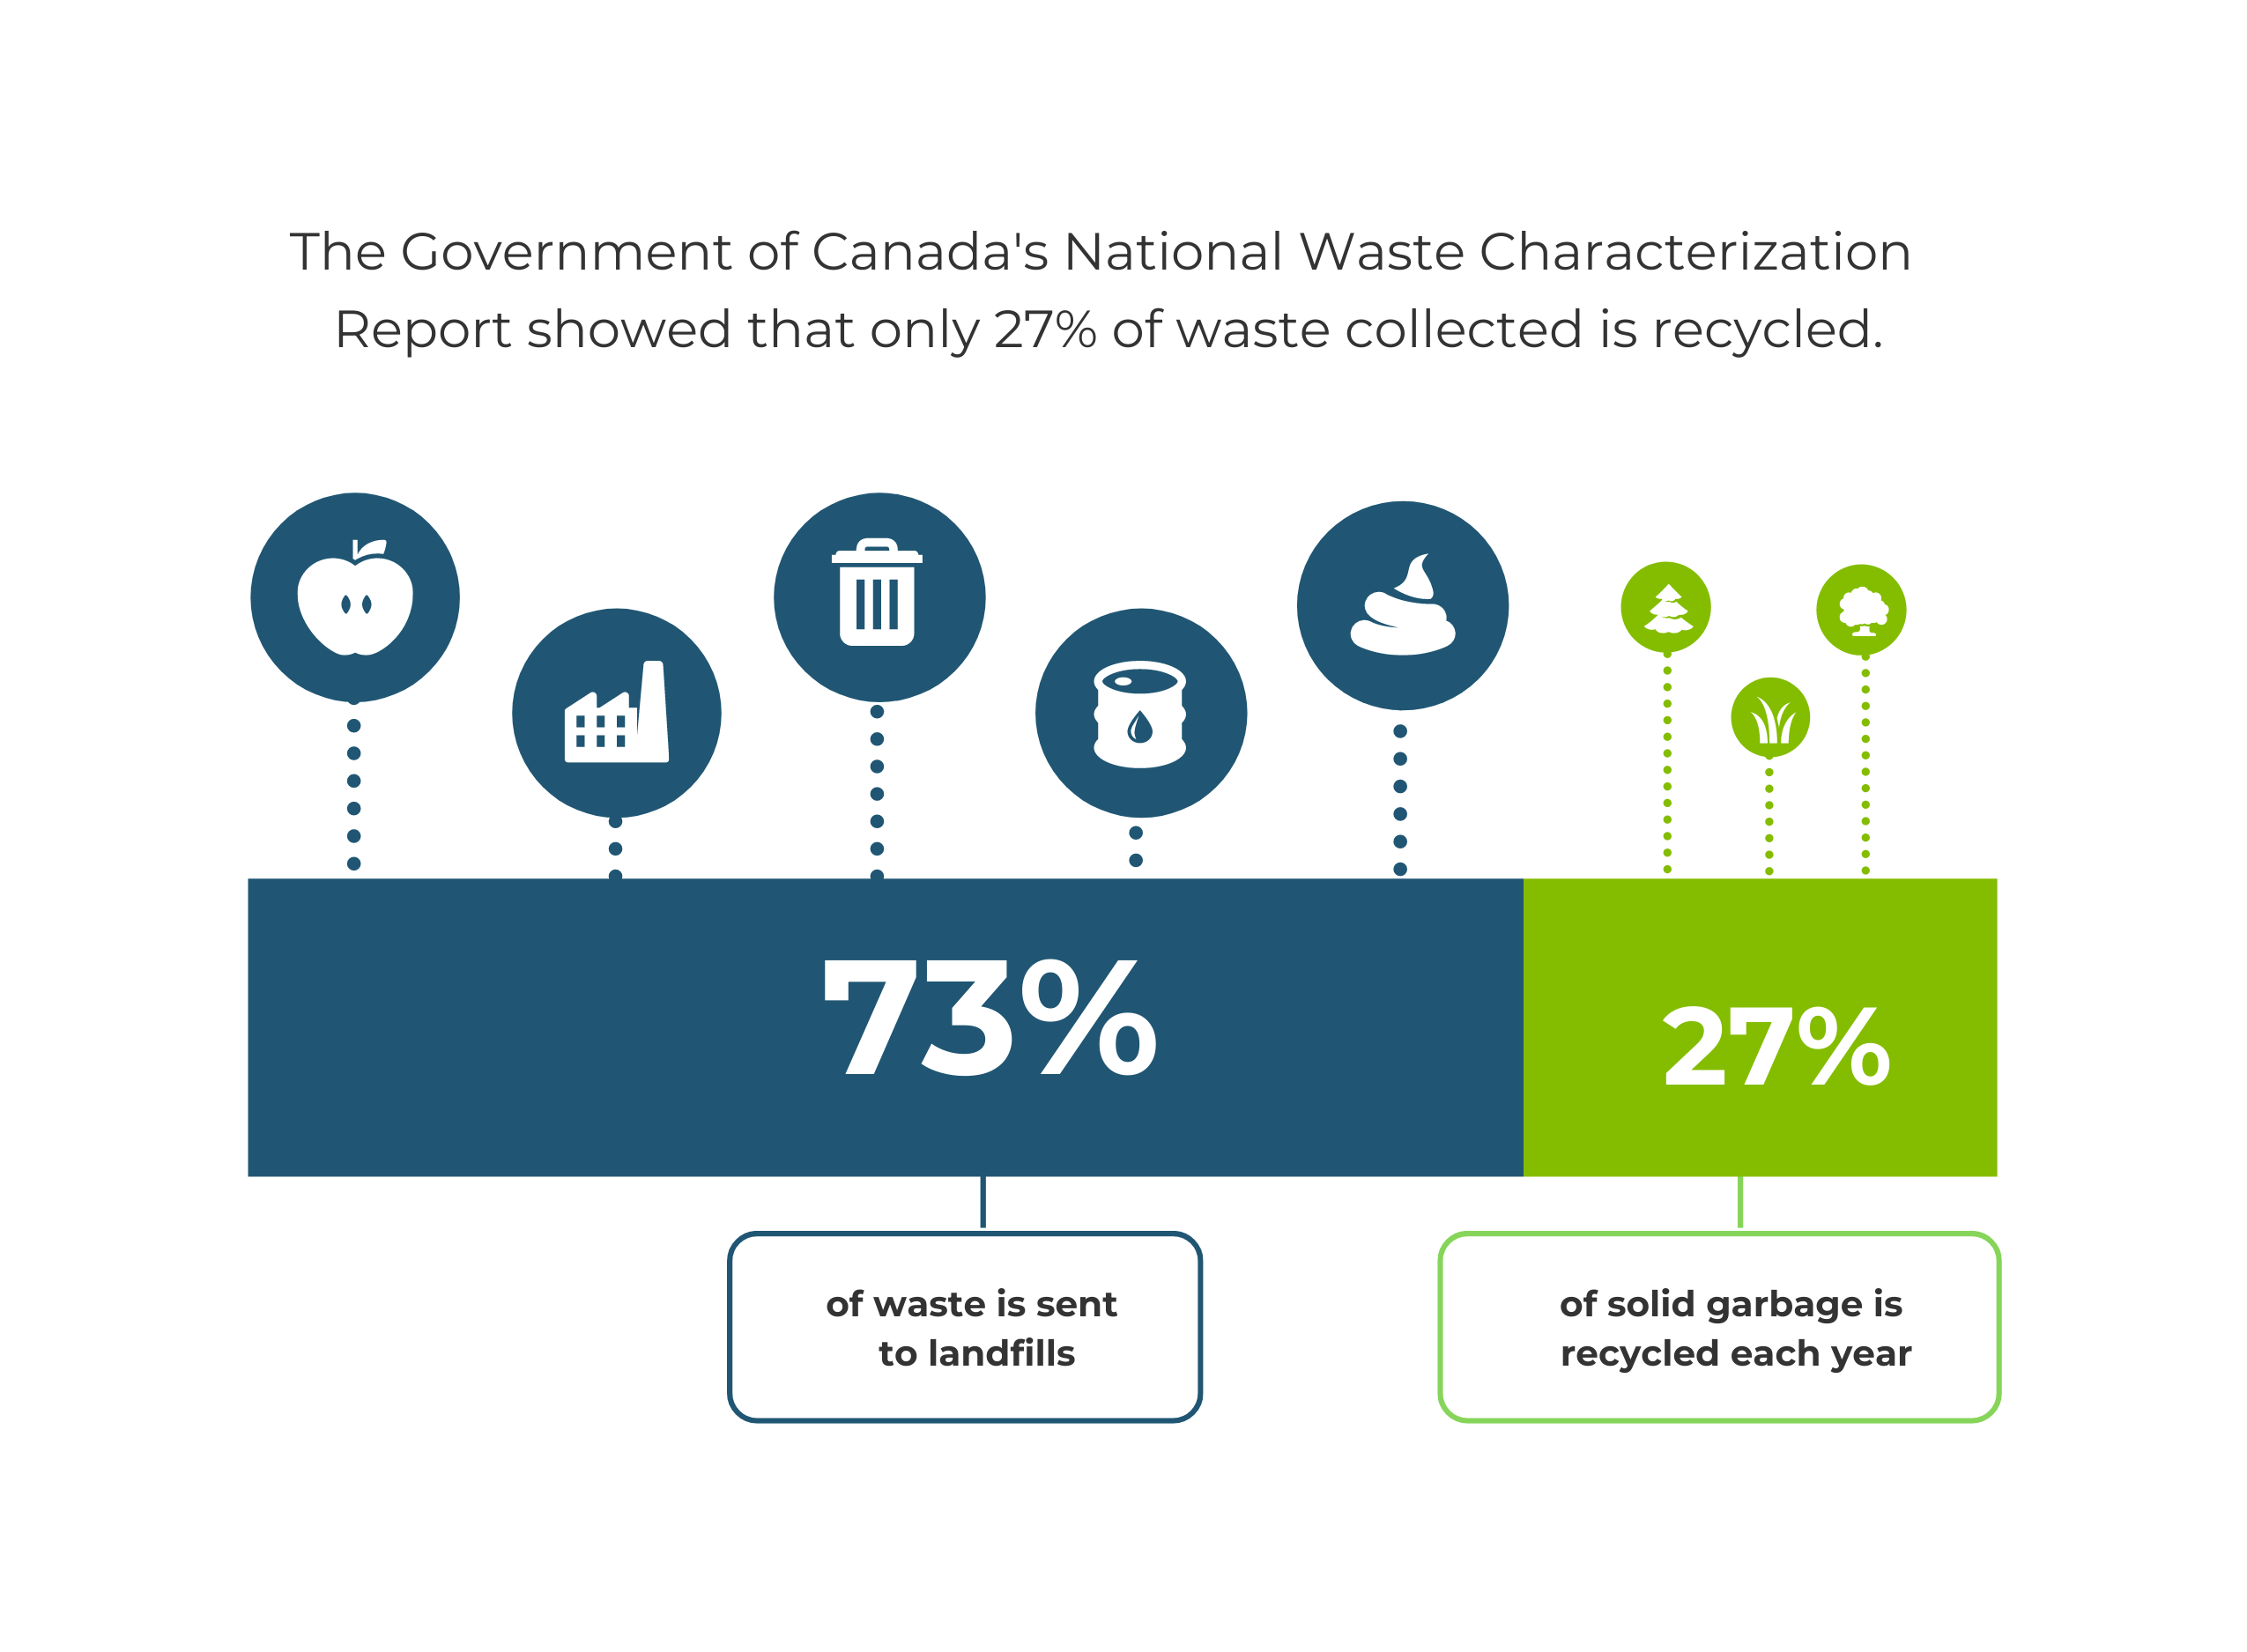 The Government of Canada's National Wast Characterization Report showed that only 27% of waste collected is recycled